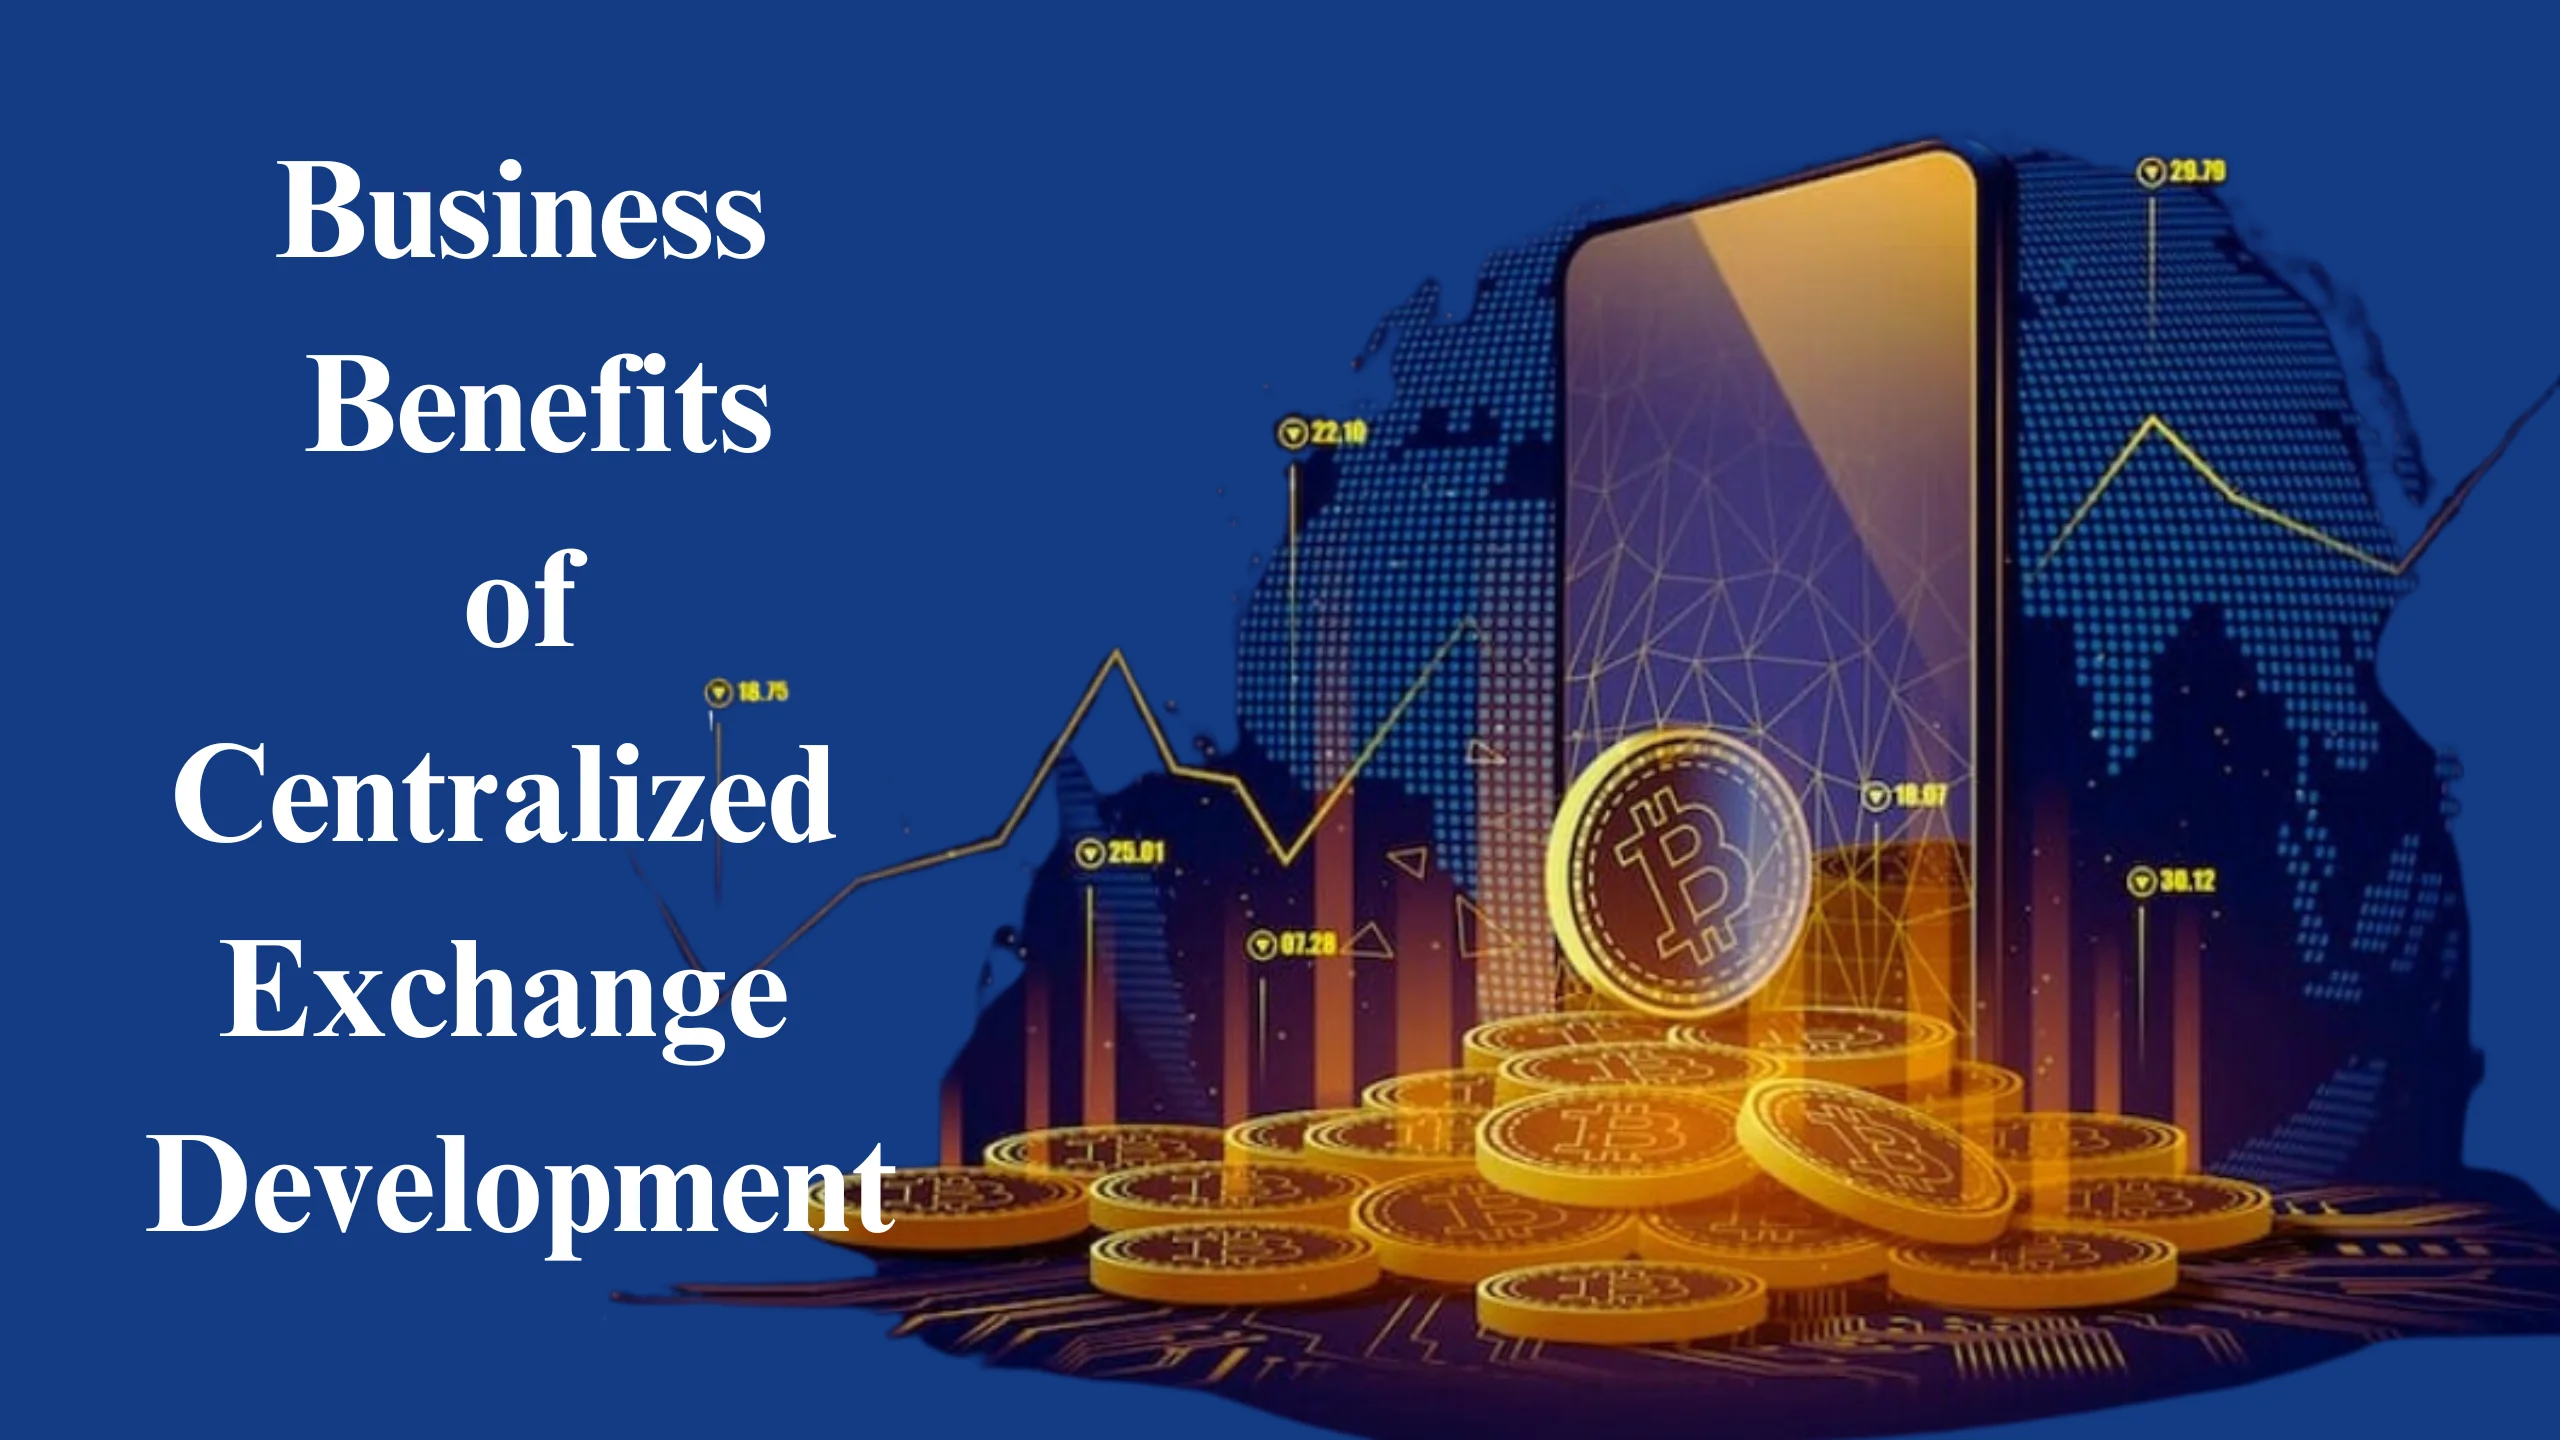 Discover the business benefits of centralized exchange development, including increased revenue streams, enhanced security, and improved user trust. These advantages can significantly boost your company's market position and profitability.